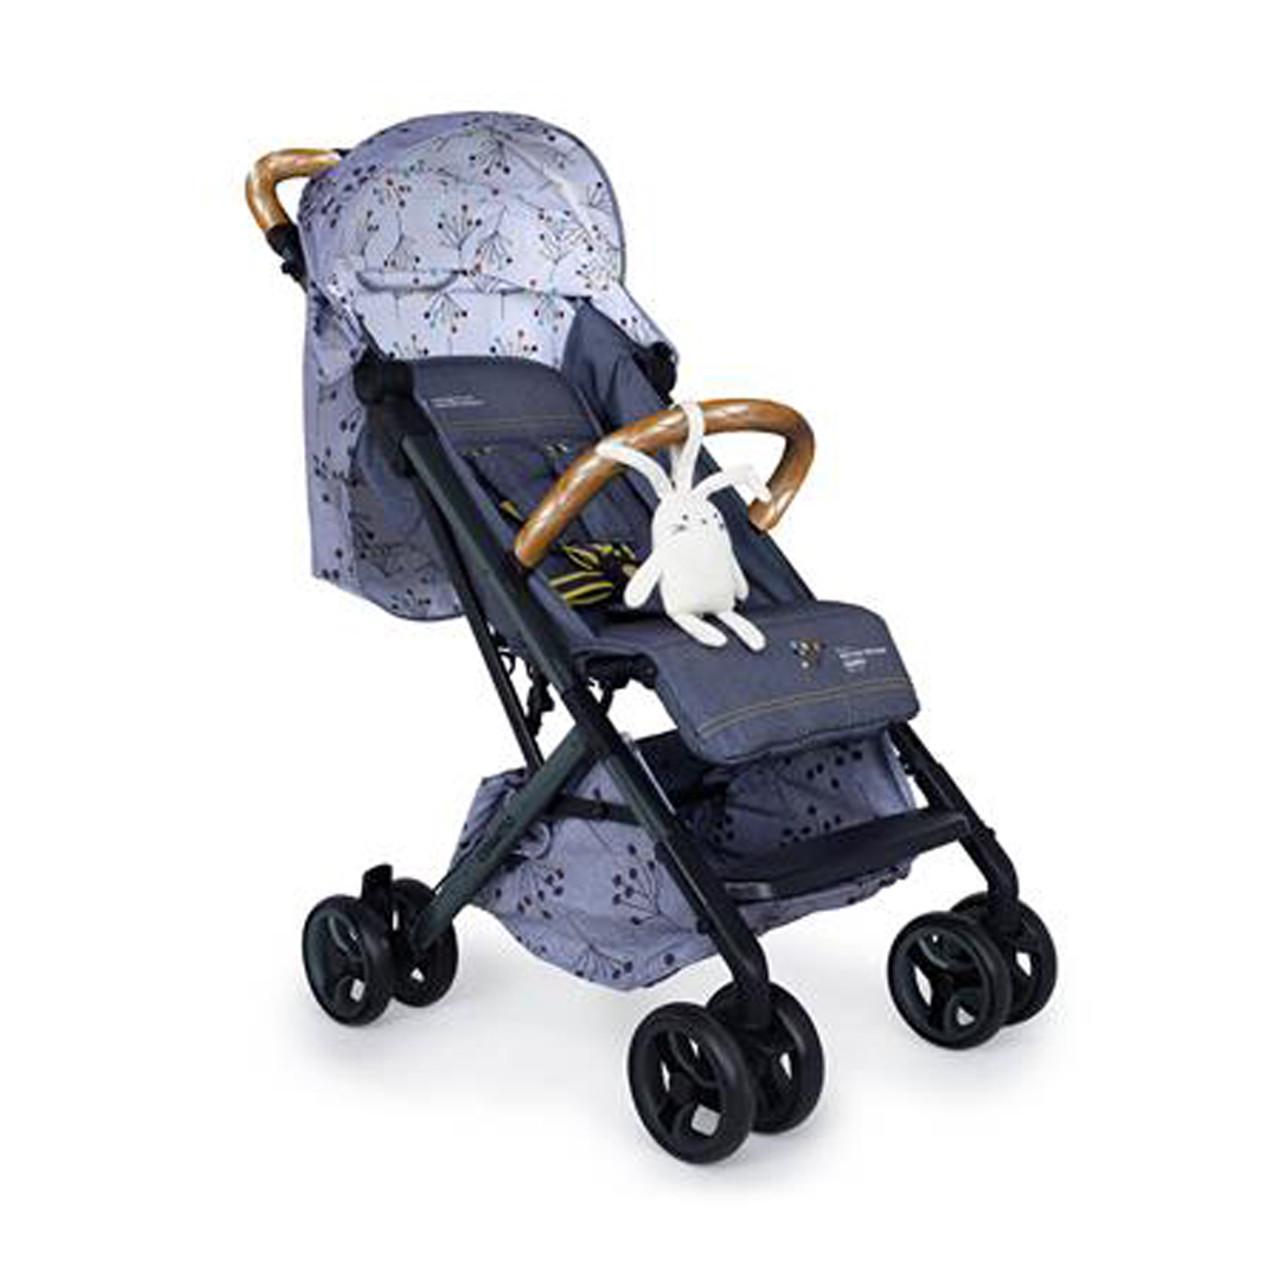 pushchairs suitable for 25kg